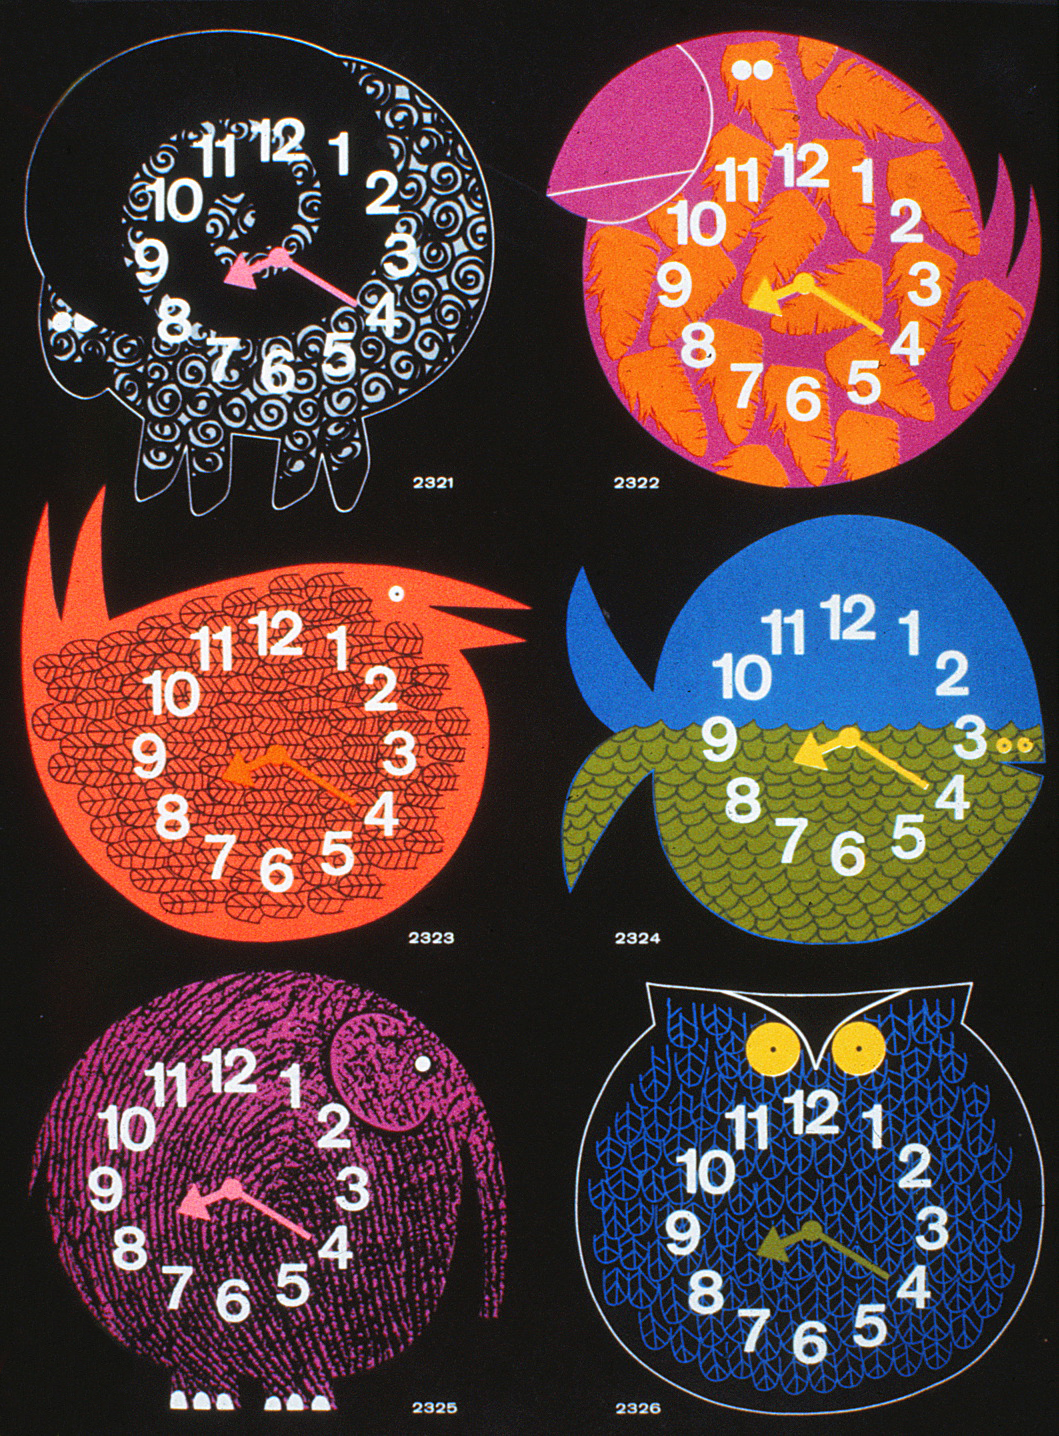 The collection of Zoo Timer clocks showing 6 different designs.